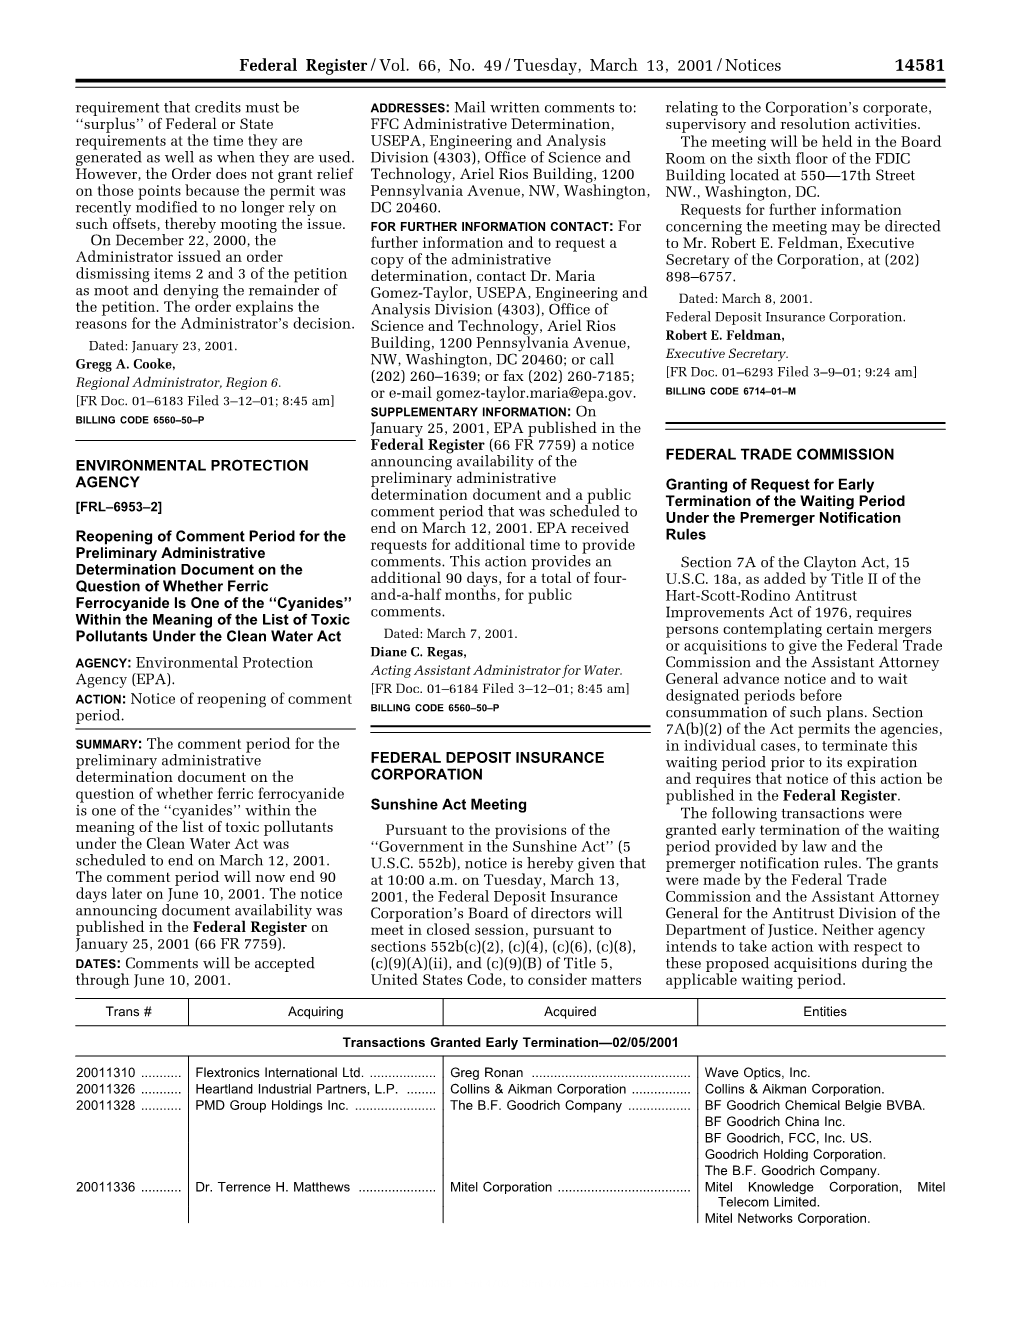 Federal Register/Vol. 66, No. 49/Tuesday, March 13, 2001/Notices